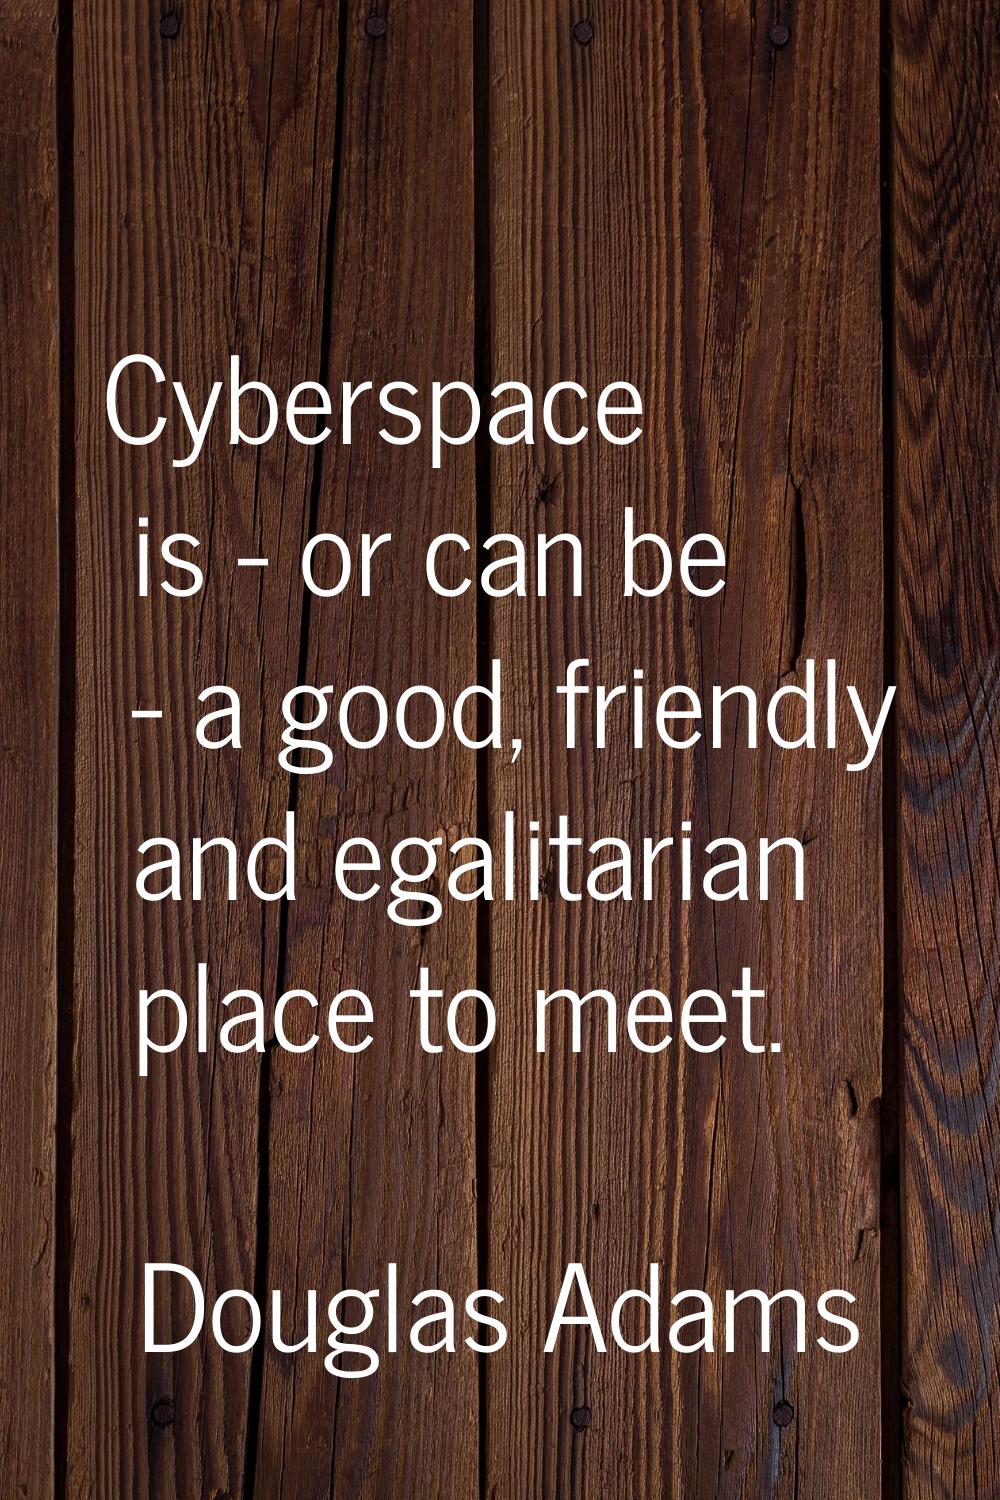 Cyberspace is - or can be - a good, friendly and egalitarian place to meet.